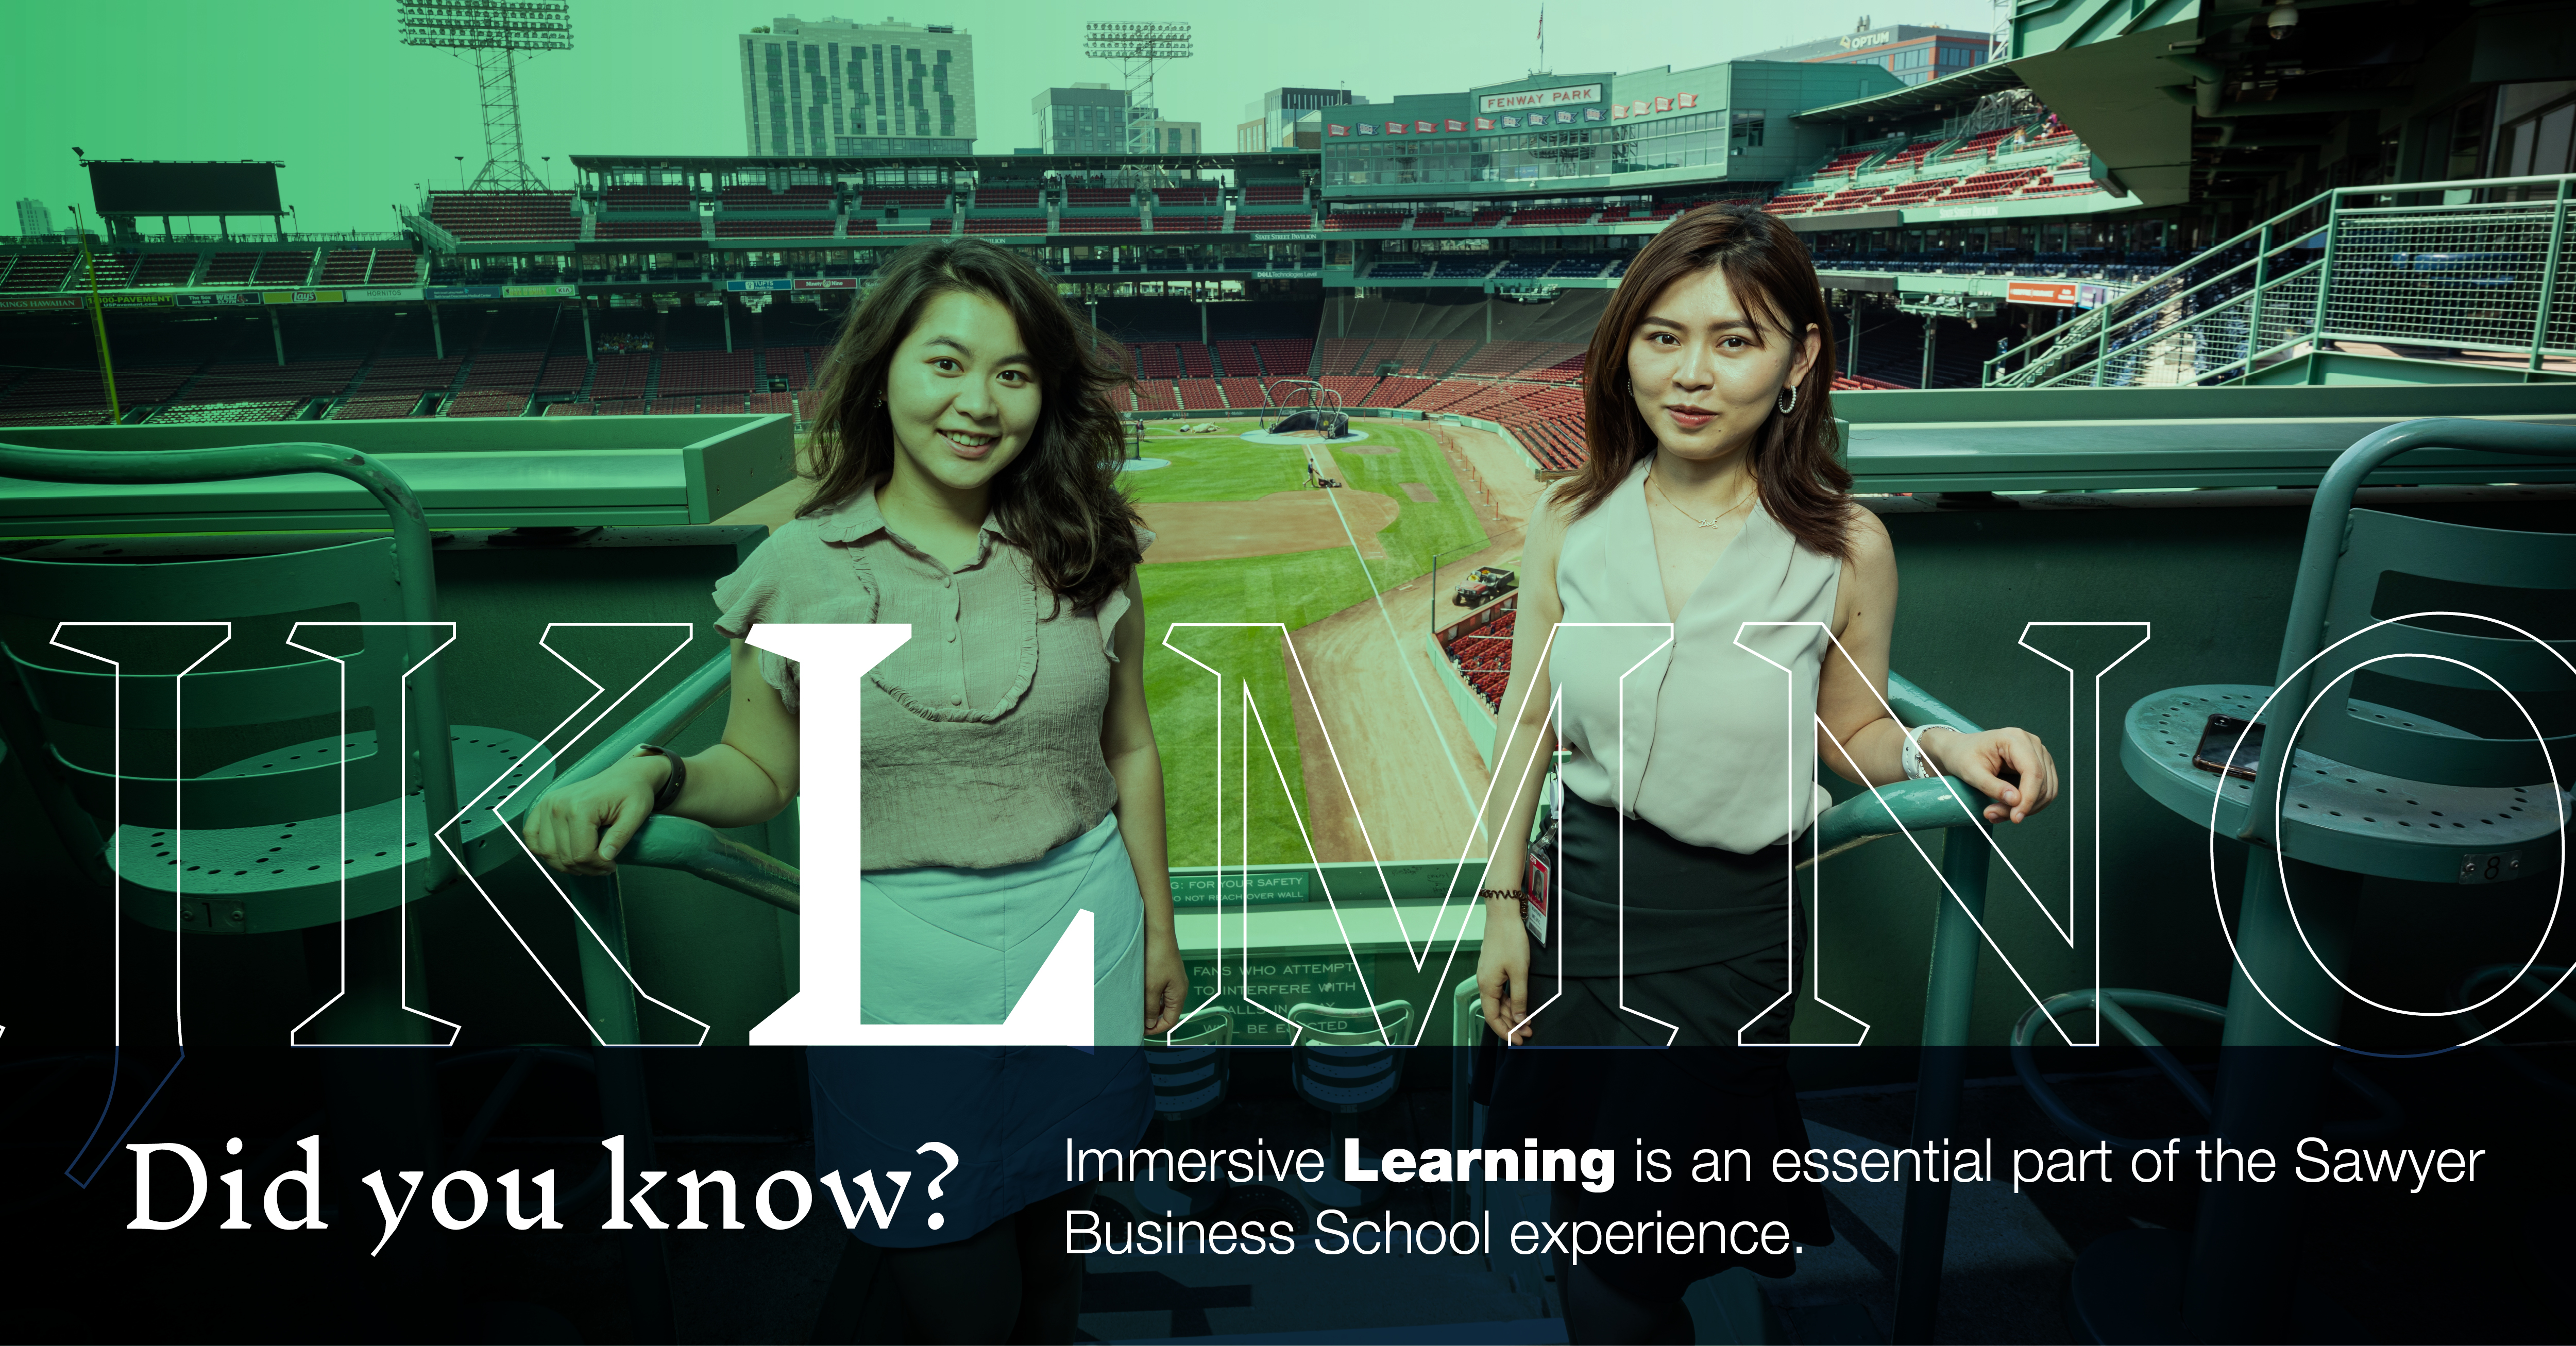 L: [image of two students on the Green Monster of Fenway Park]: Did you know that Immersive Learning is an essential part of the Sawyer Business School experience?